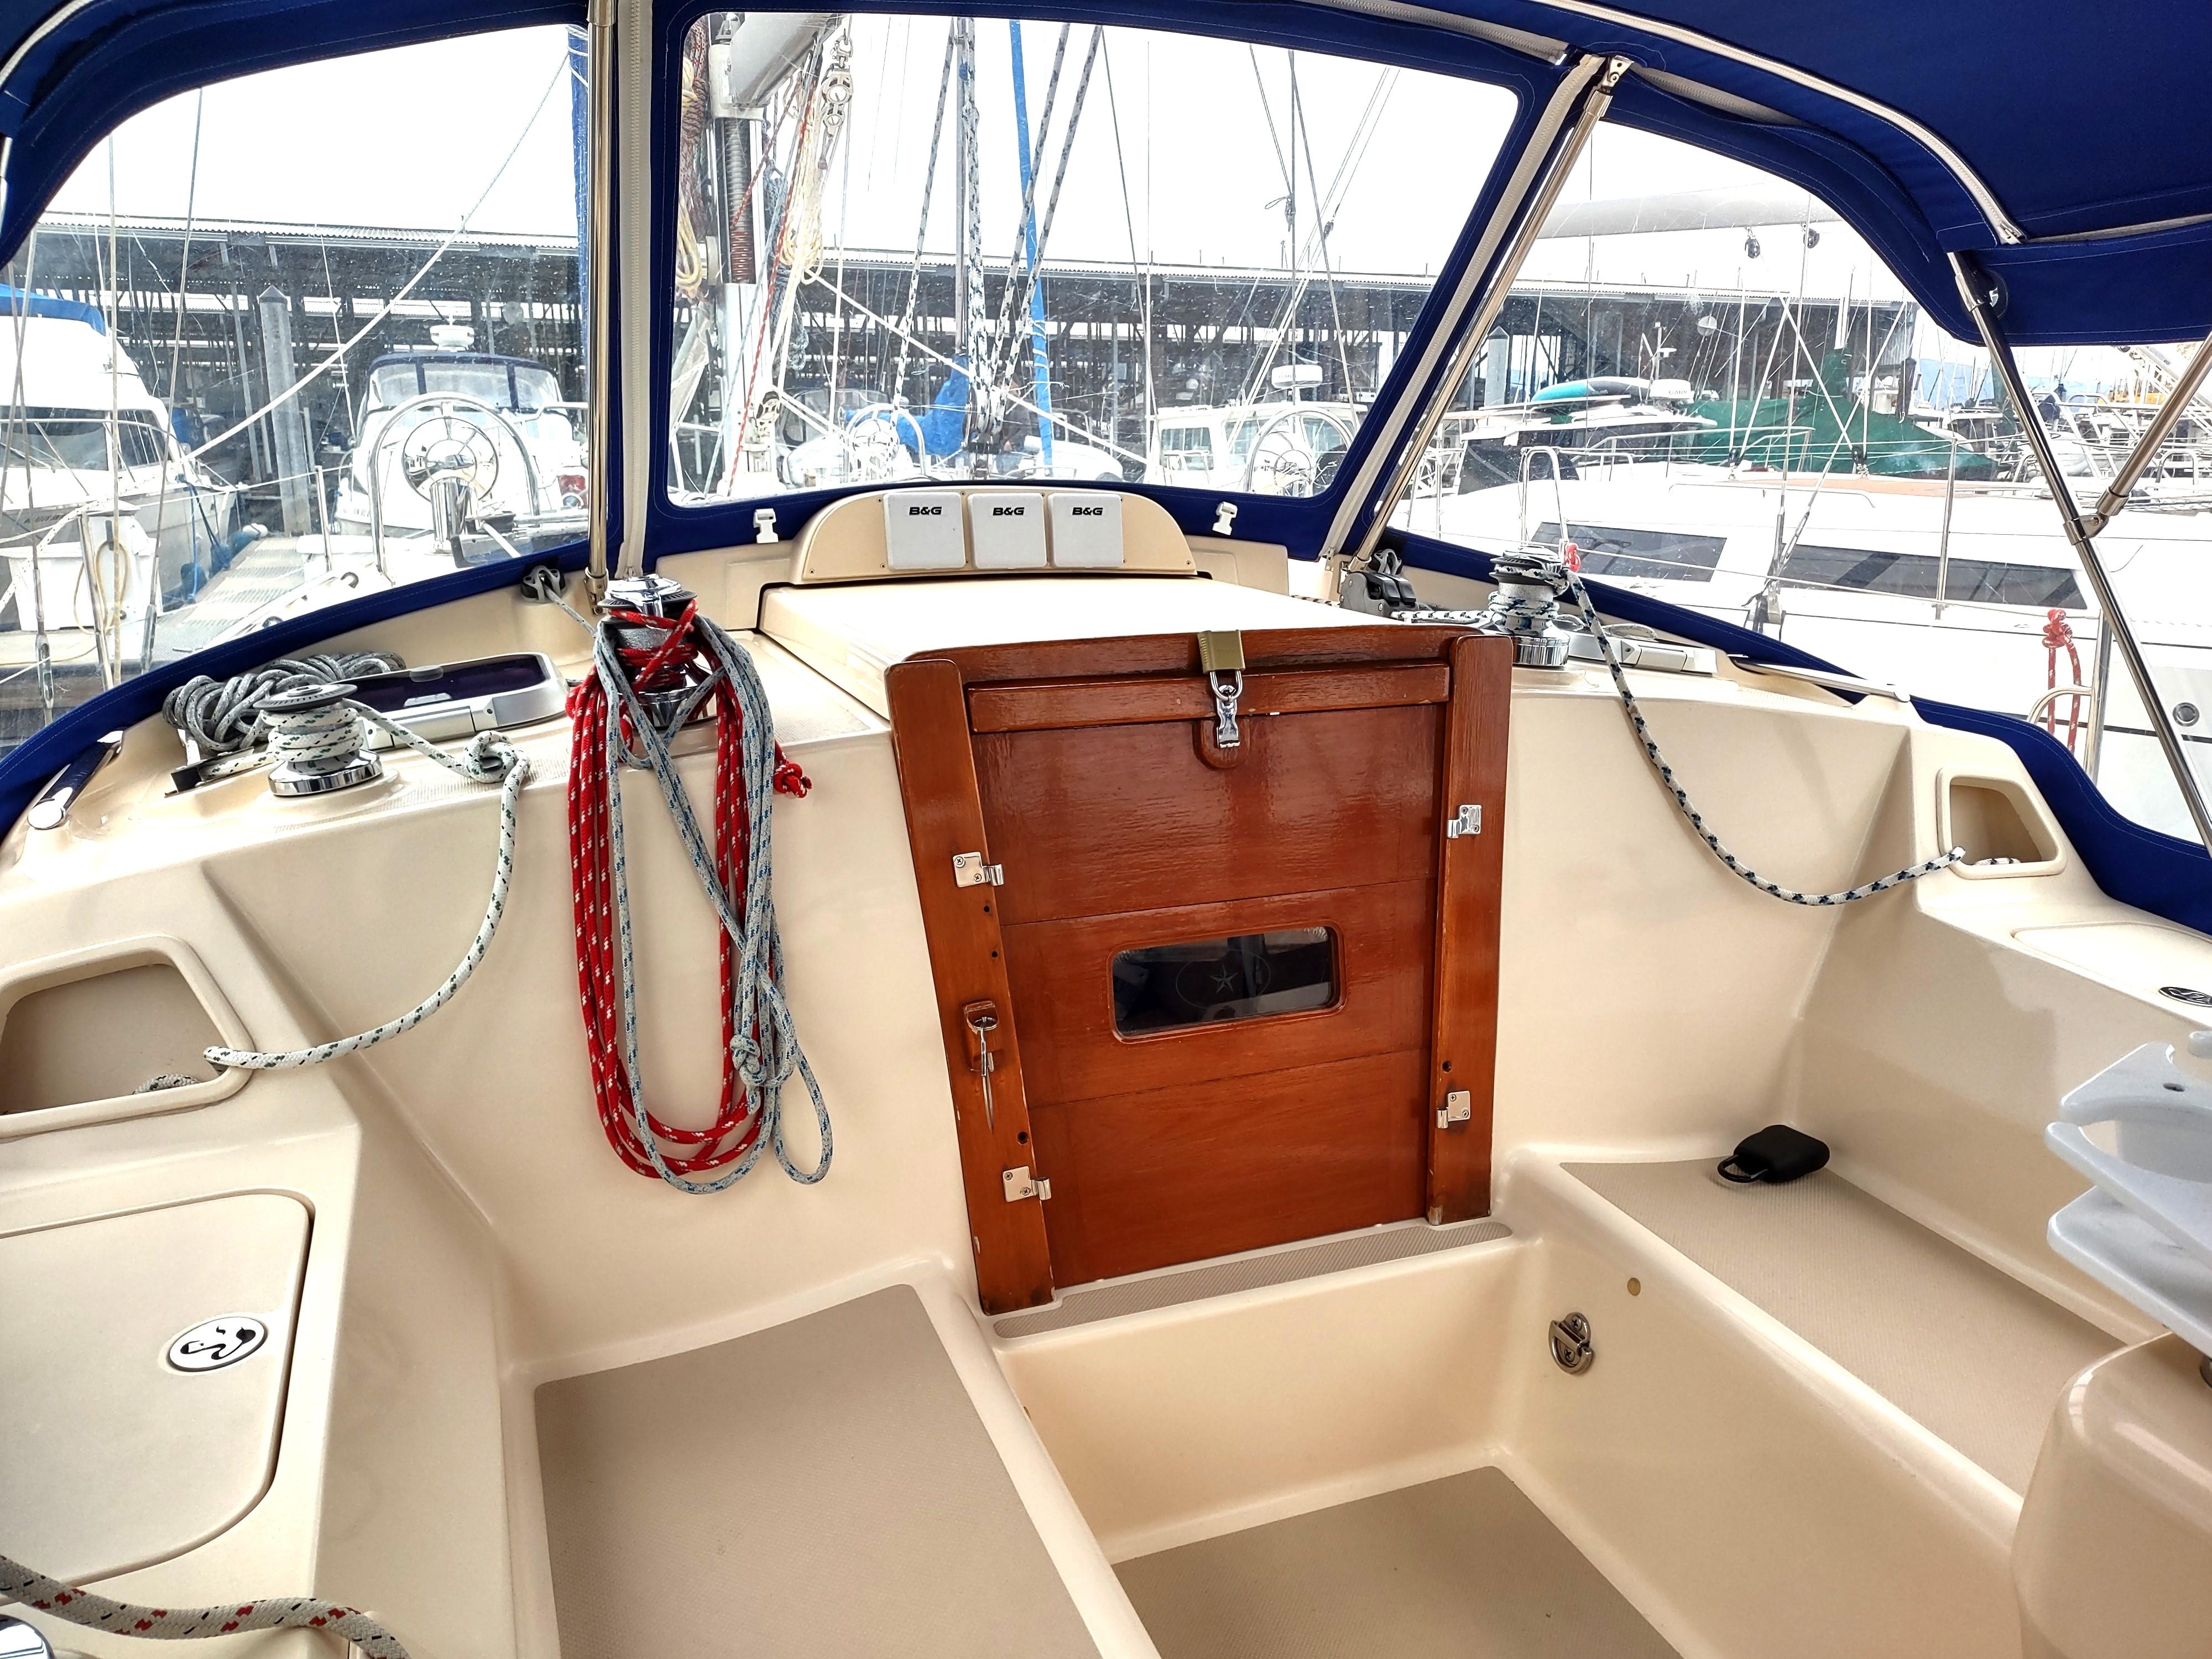 Exemplary First-Rate cabin boat for sale On Offers 